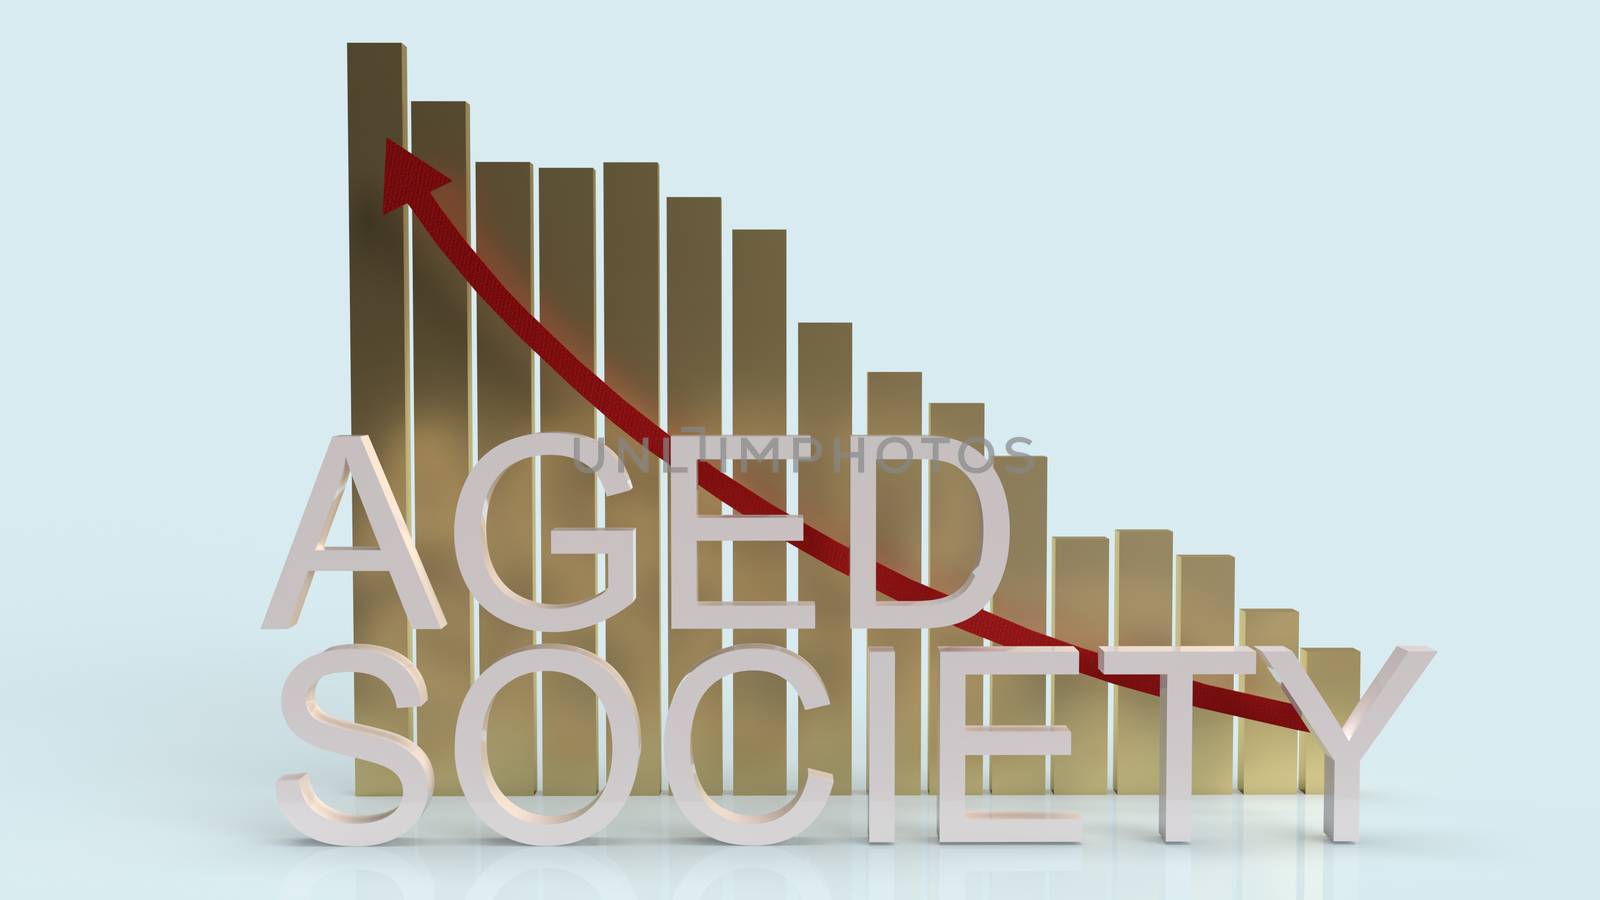 The aged society word and chart on blue background for society content 3d rendering.